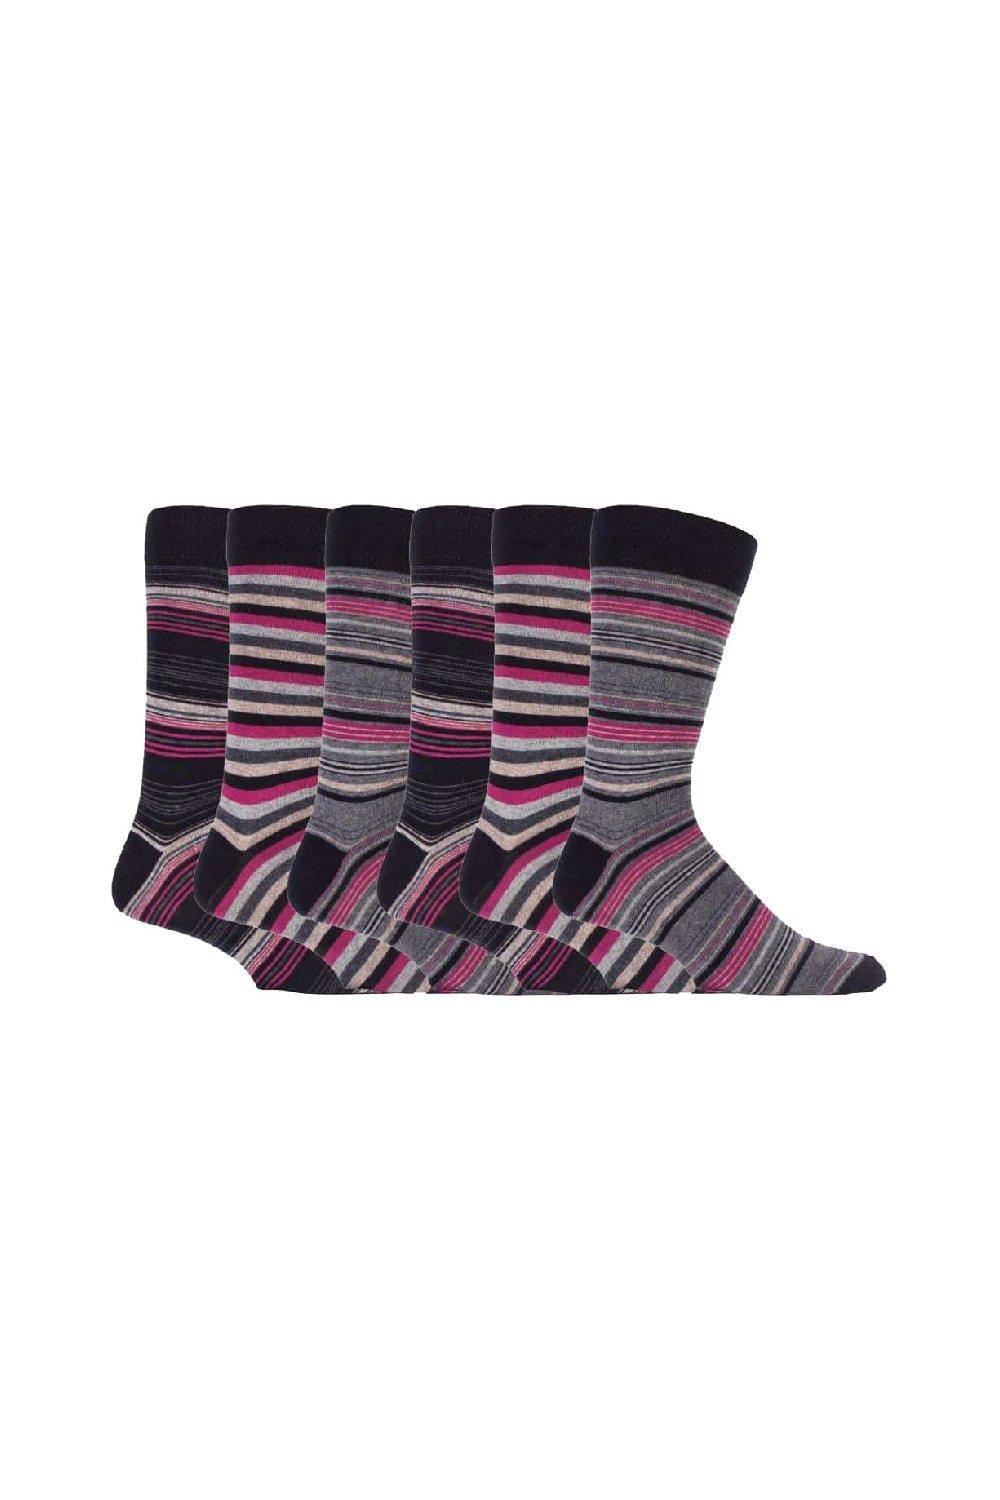 6 Pack Colourful Striped Patterned Cotton Dress Socks